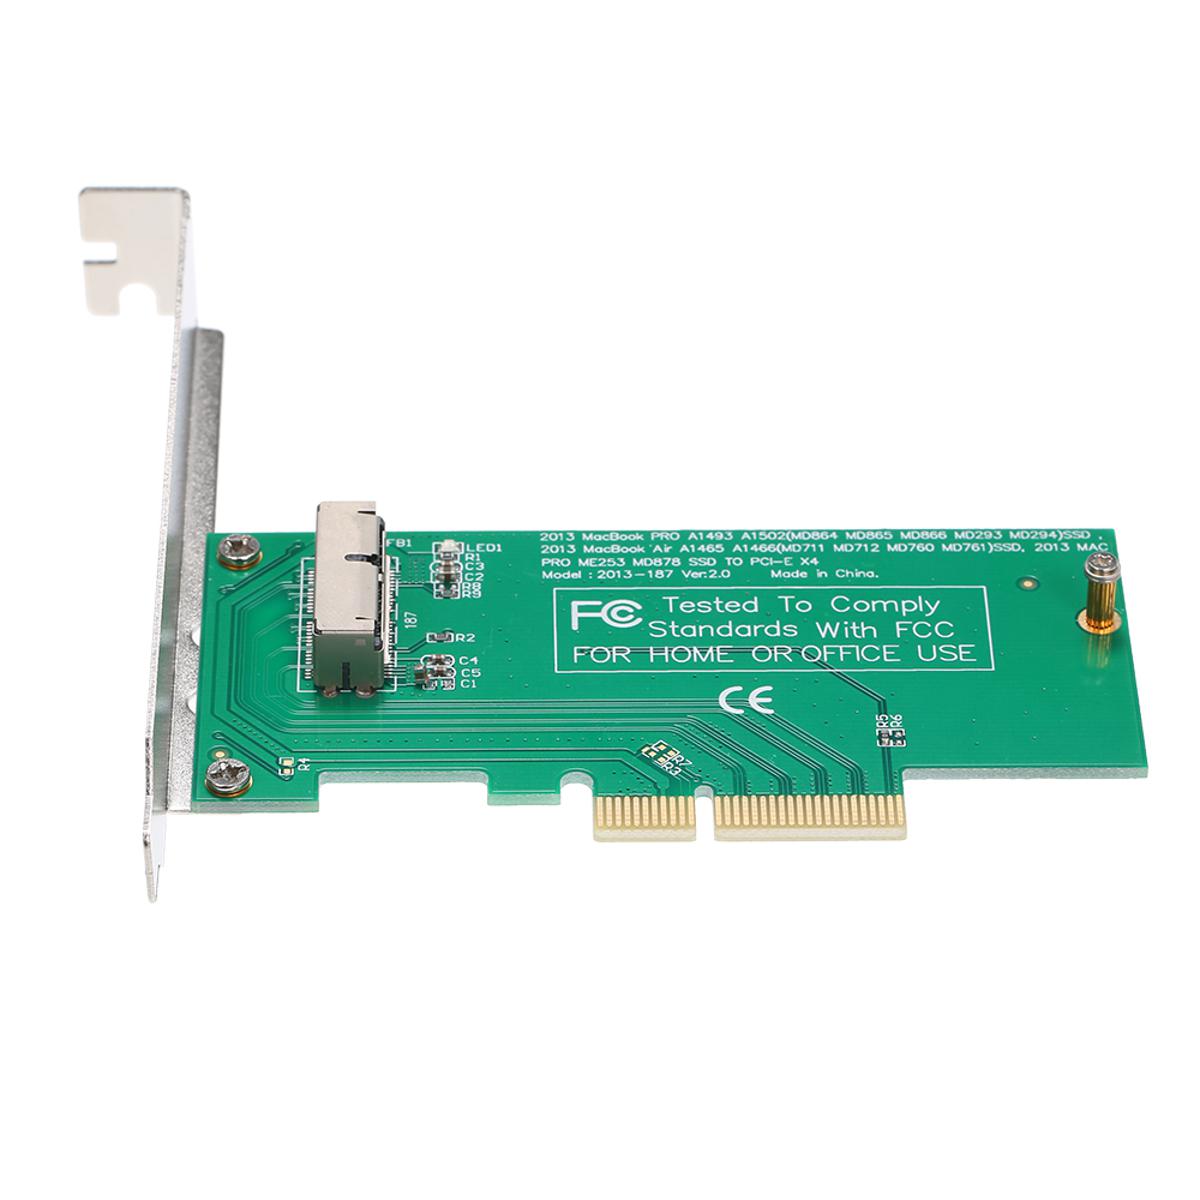 HXSJ Pcie Ssd Adapter C-ard Replacement For Ma-cbook Air And Pro Retina 2013 2014 2015 Hdd Controller Converter To Pci Express X4